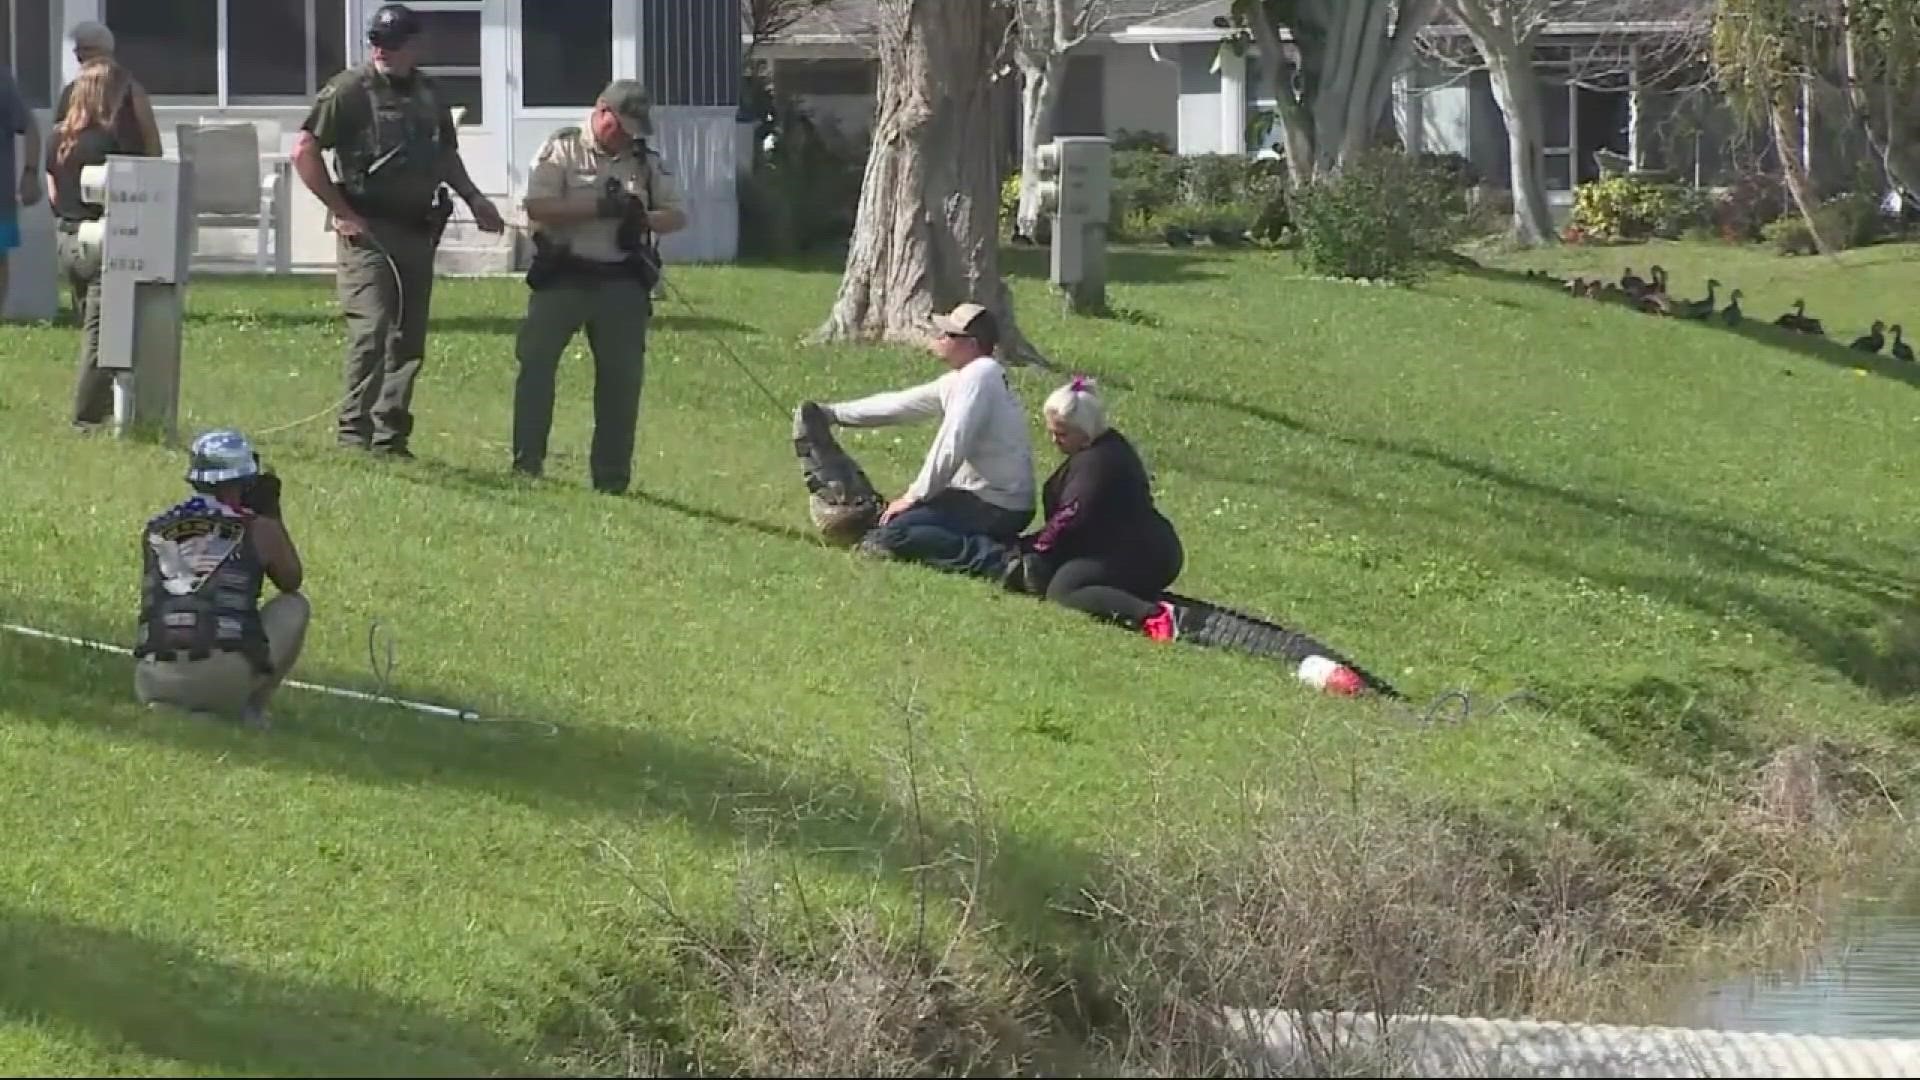 The woman was walking her dog by a pond at a retirement community when neighbors say an alligator jumped out of the water and grabbed her, according to reports.